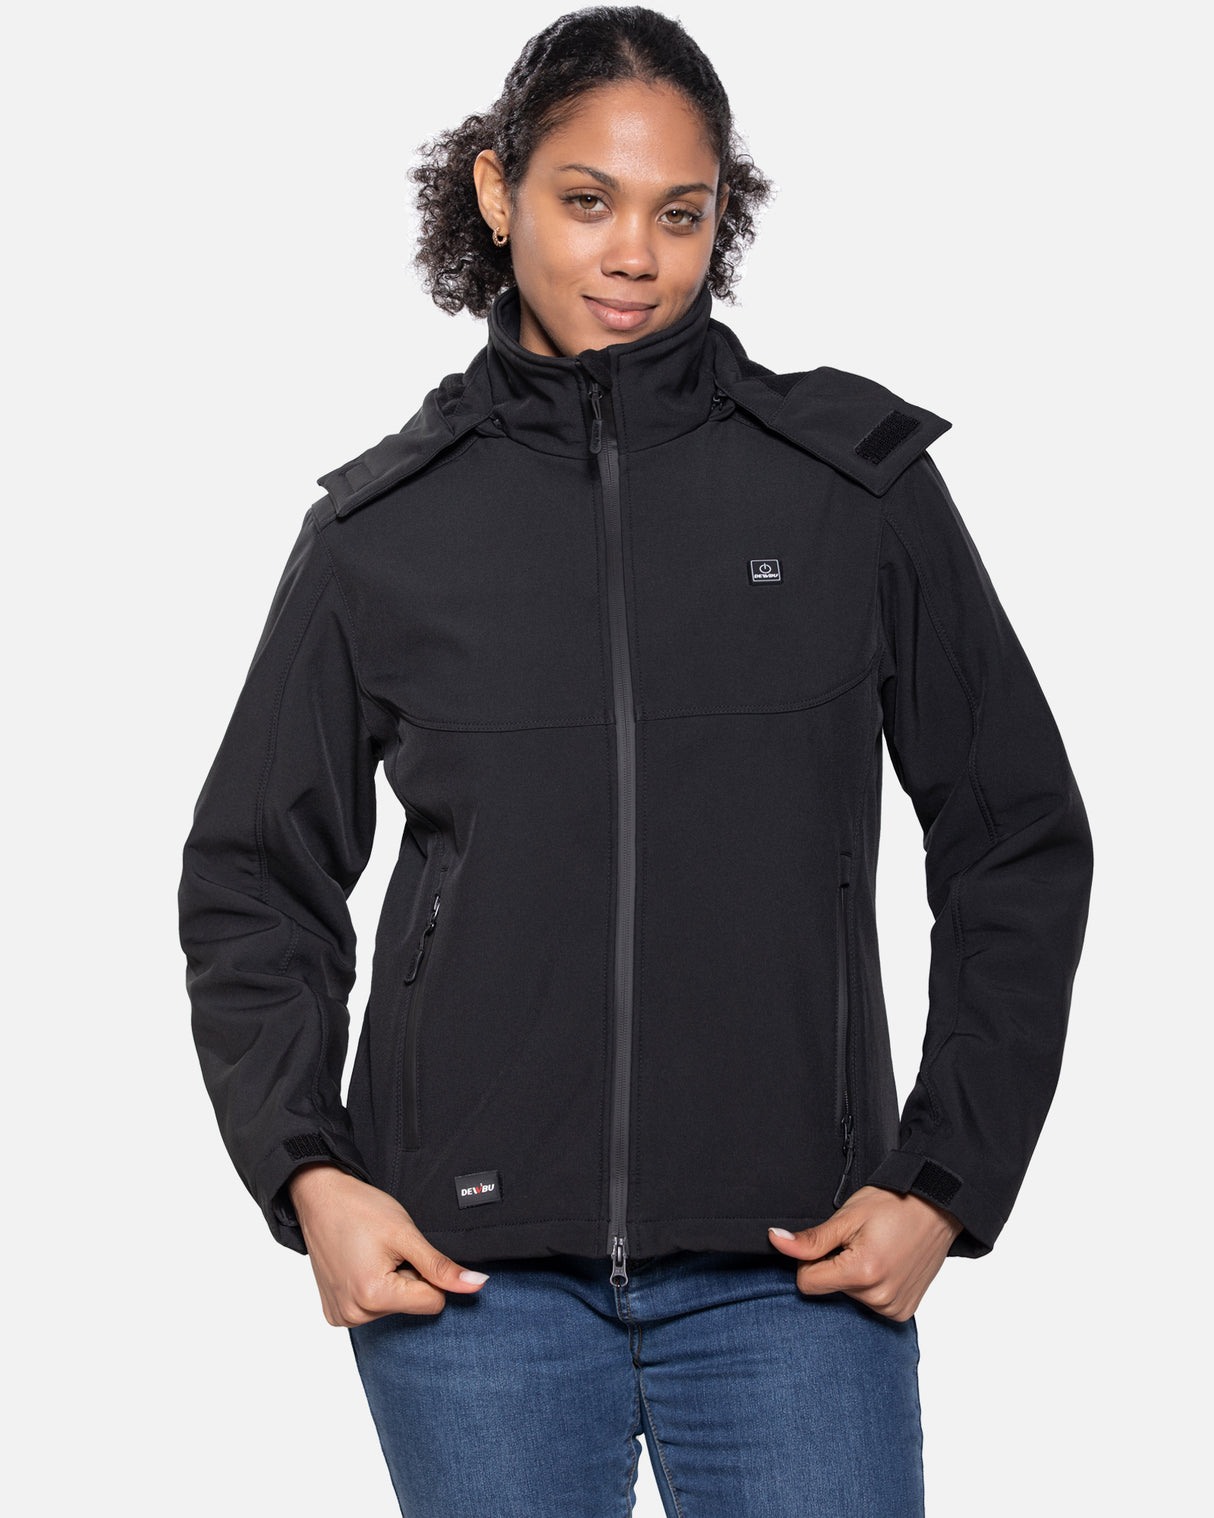 Detachable hoods, To attach to jackets